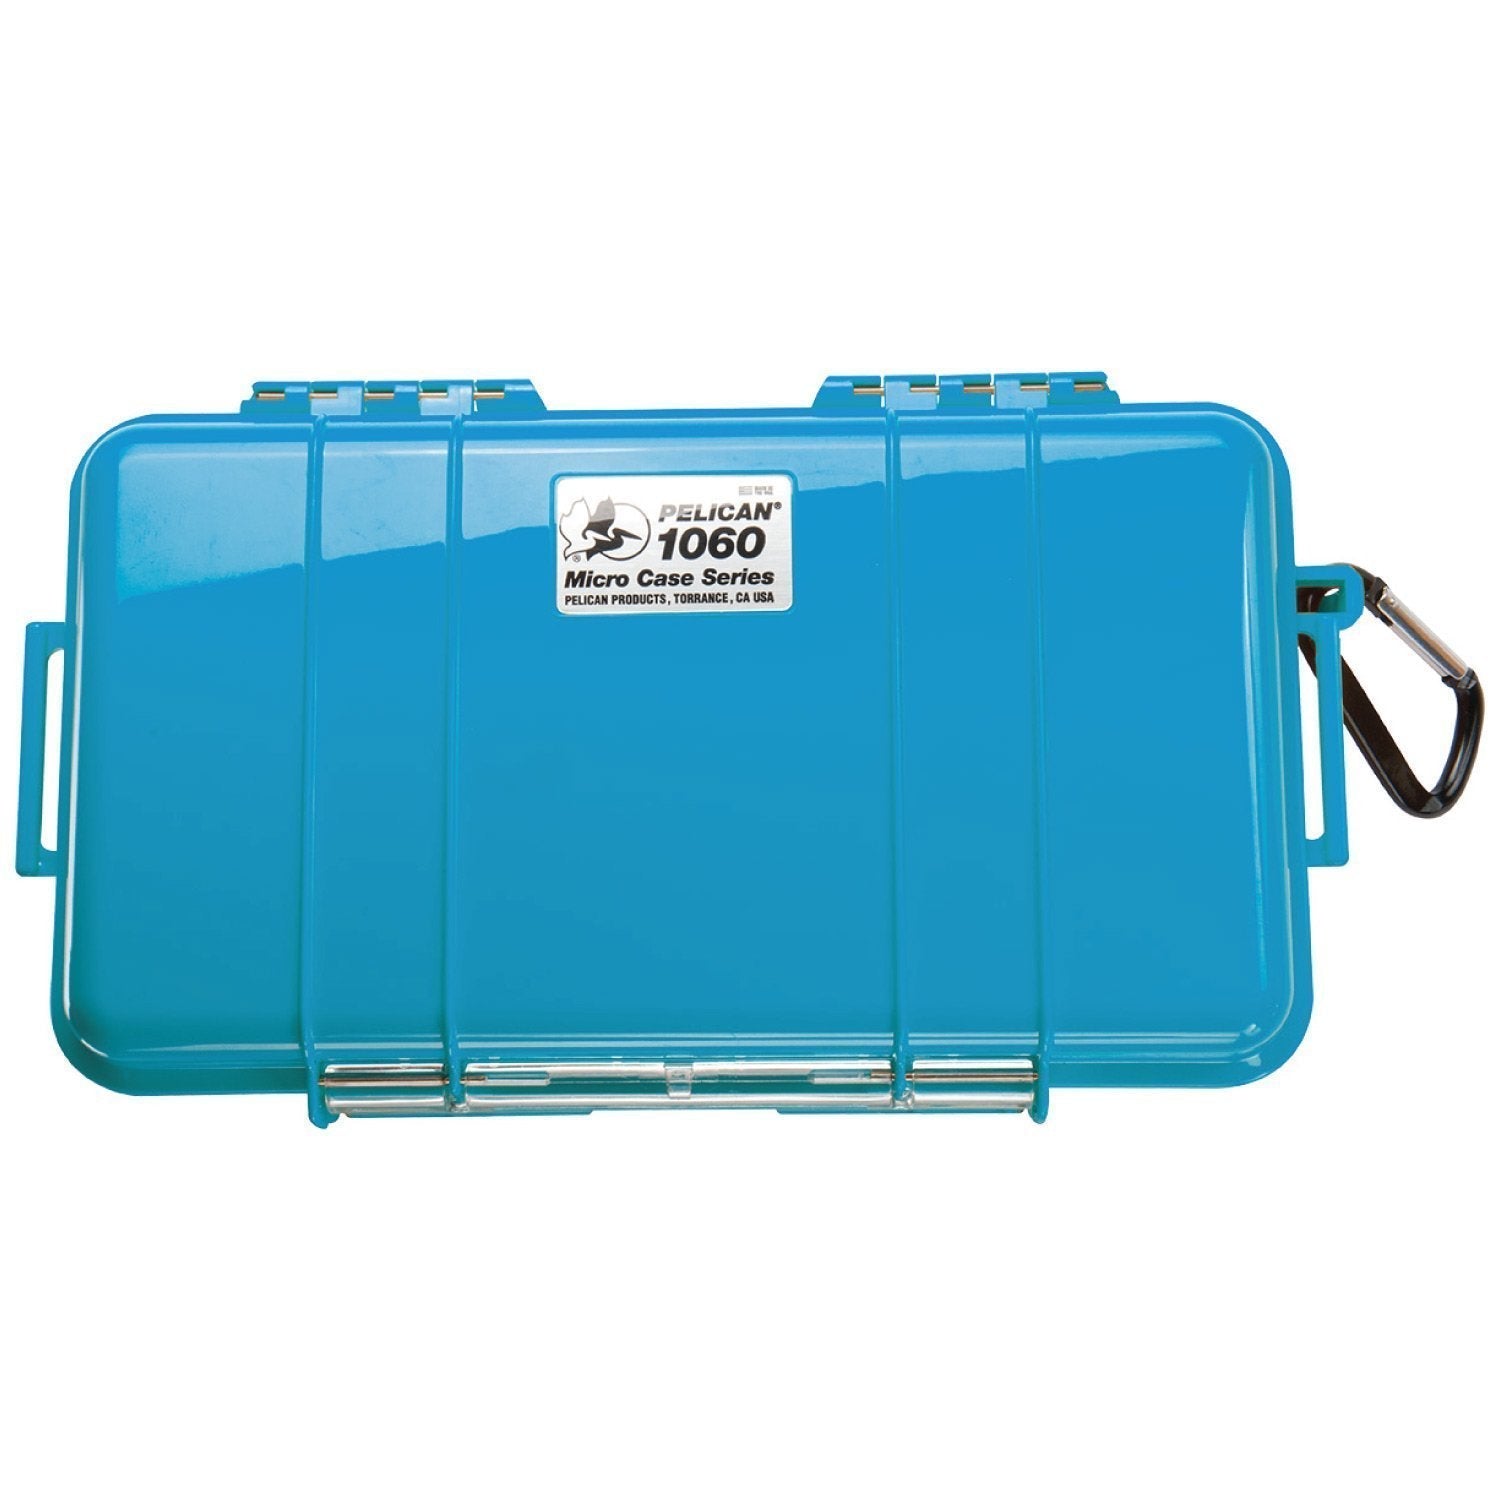 Pelican 1060 Micro Case Cases Pelican Products Blue Shell with Black Liner Tactical Gear Supplier Tactical Distributors Australia